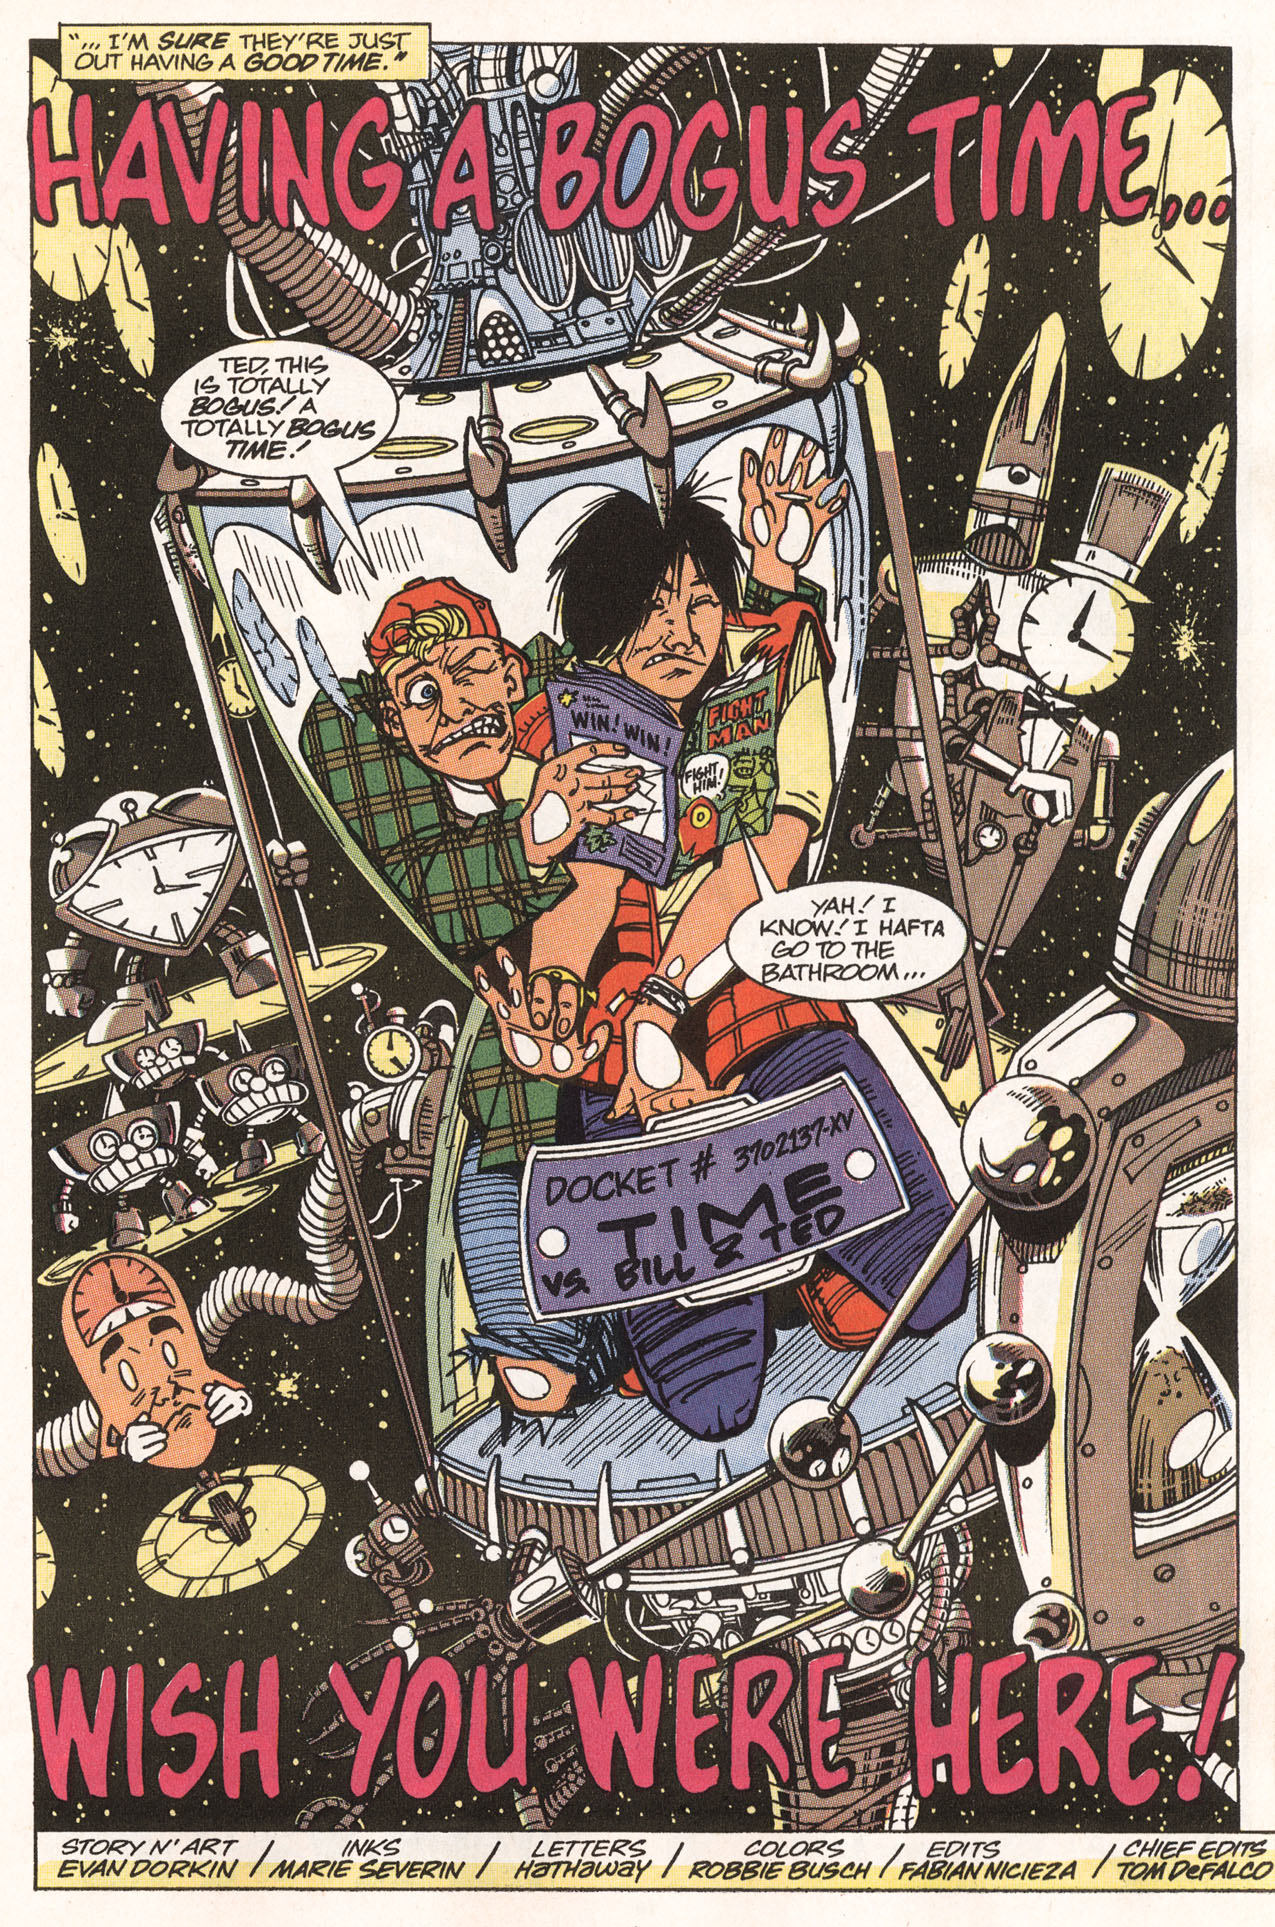 Read online Bill & Ted's Excellent Comic Book comic -  Issue #6 - 14